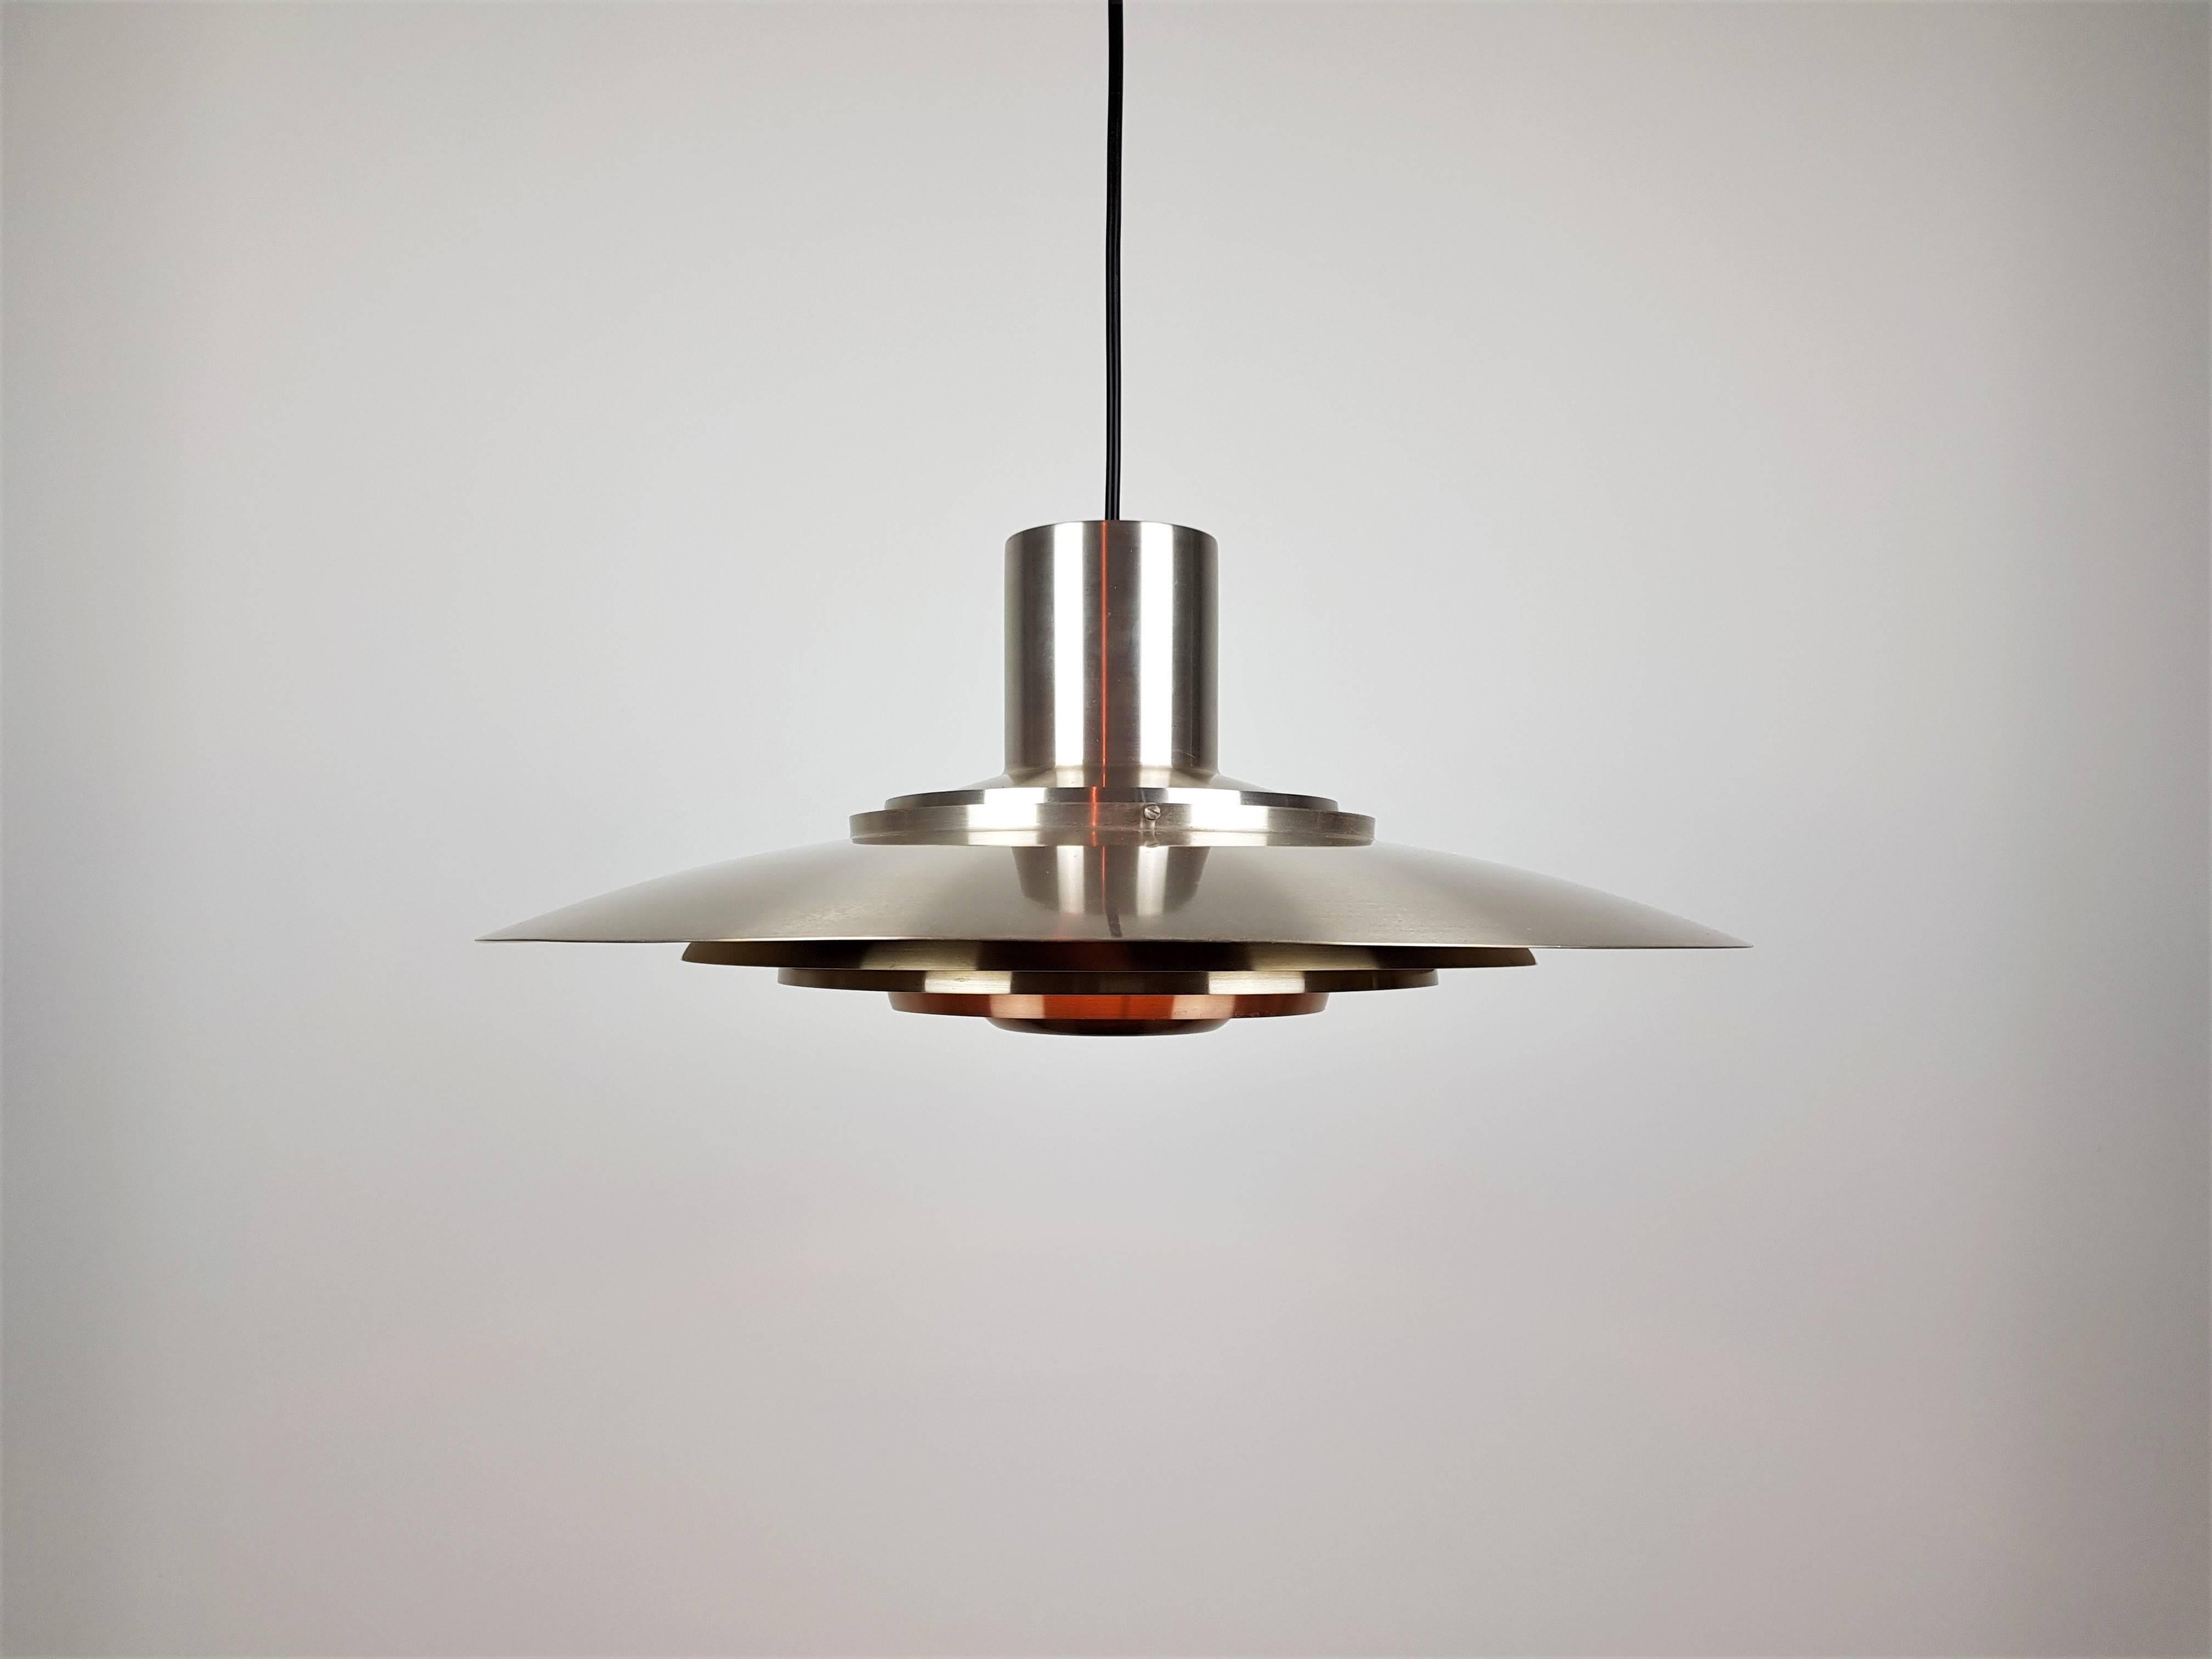 A lightly brassed aluminium pendant by Preben Fabricius & Jørgen Kastholm for Nordisk Solar Compagni, 1964.
 
Comprising of five tiers, the decreasing sized tiers obscure any glare and sight of the light bulb resulting in a warm muted light being